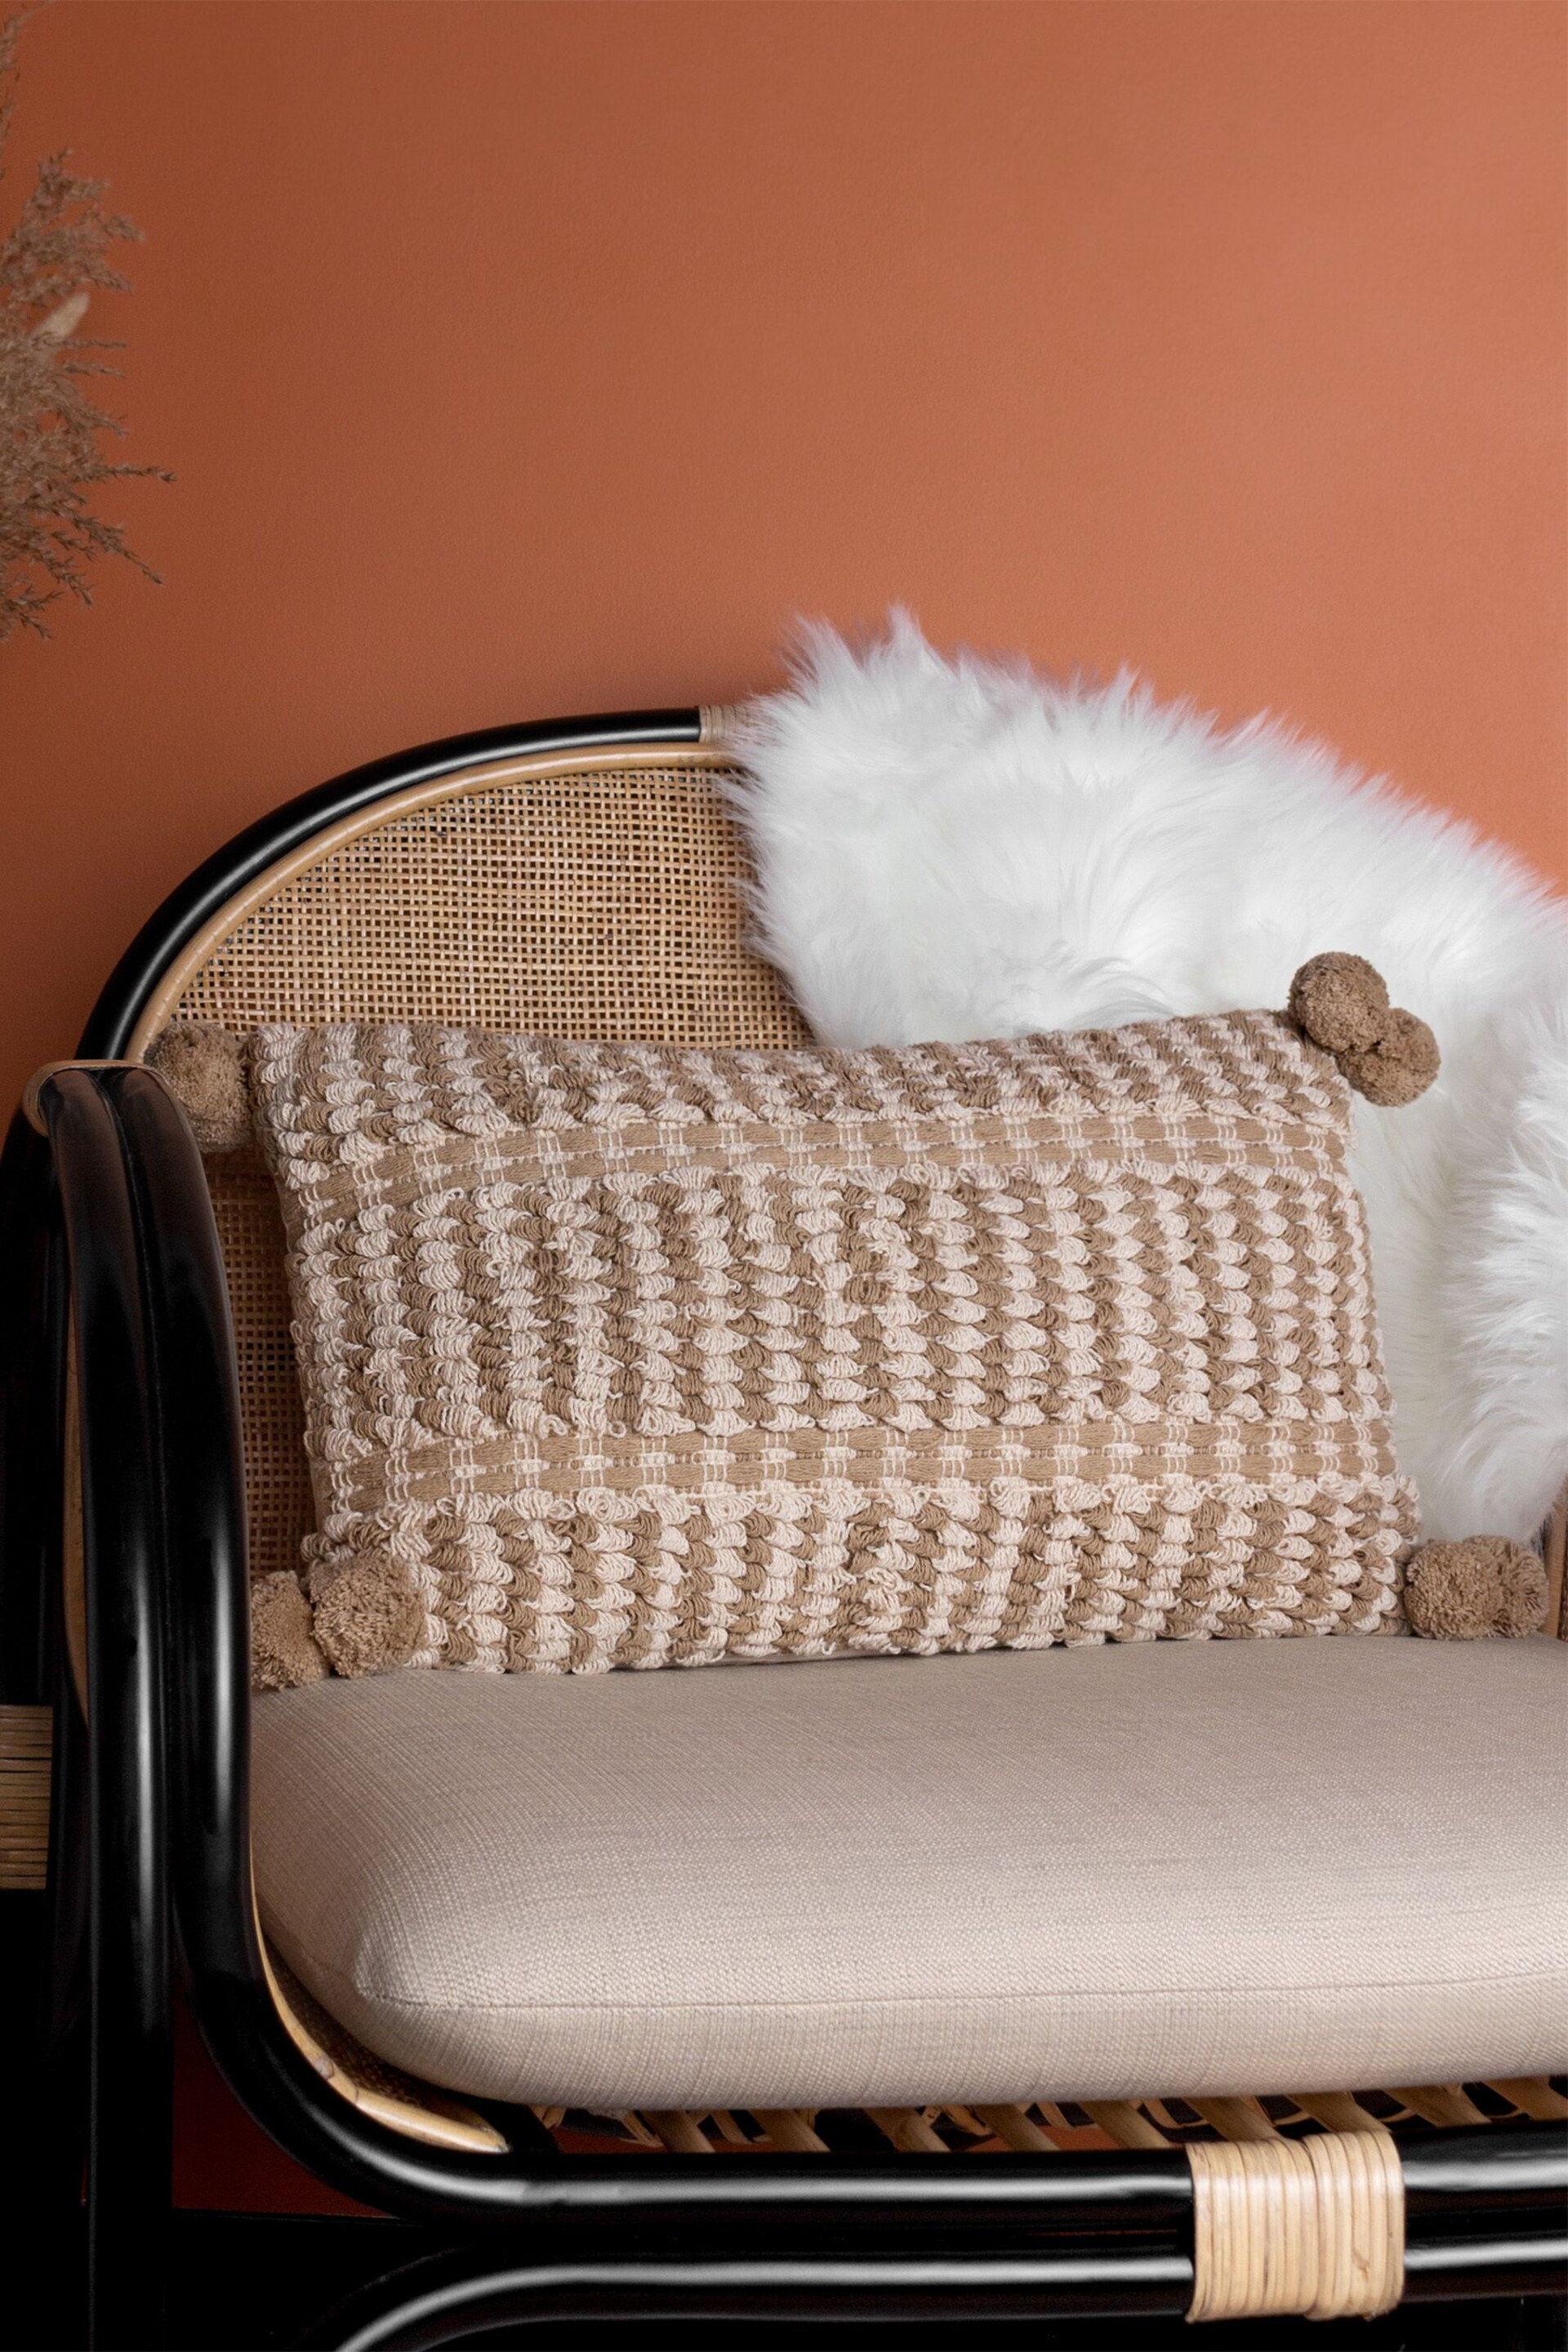 furn. Natural Ayaan Woven Loop Tufted Cotton Double Pom Pom Cushion - Image 4 of 6